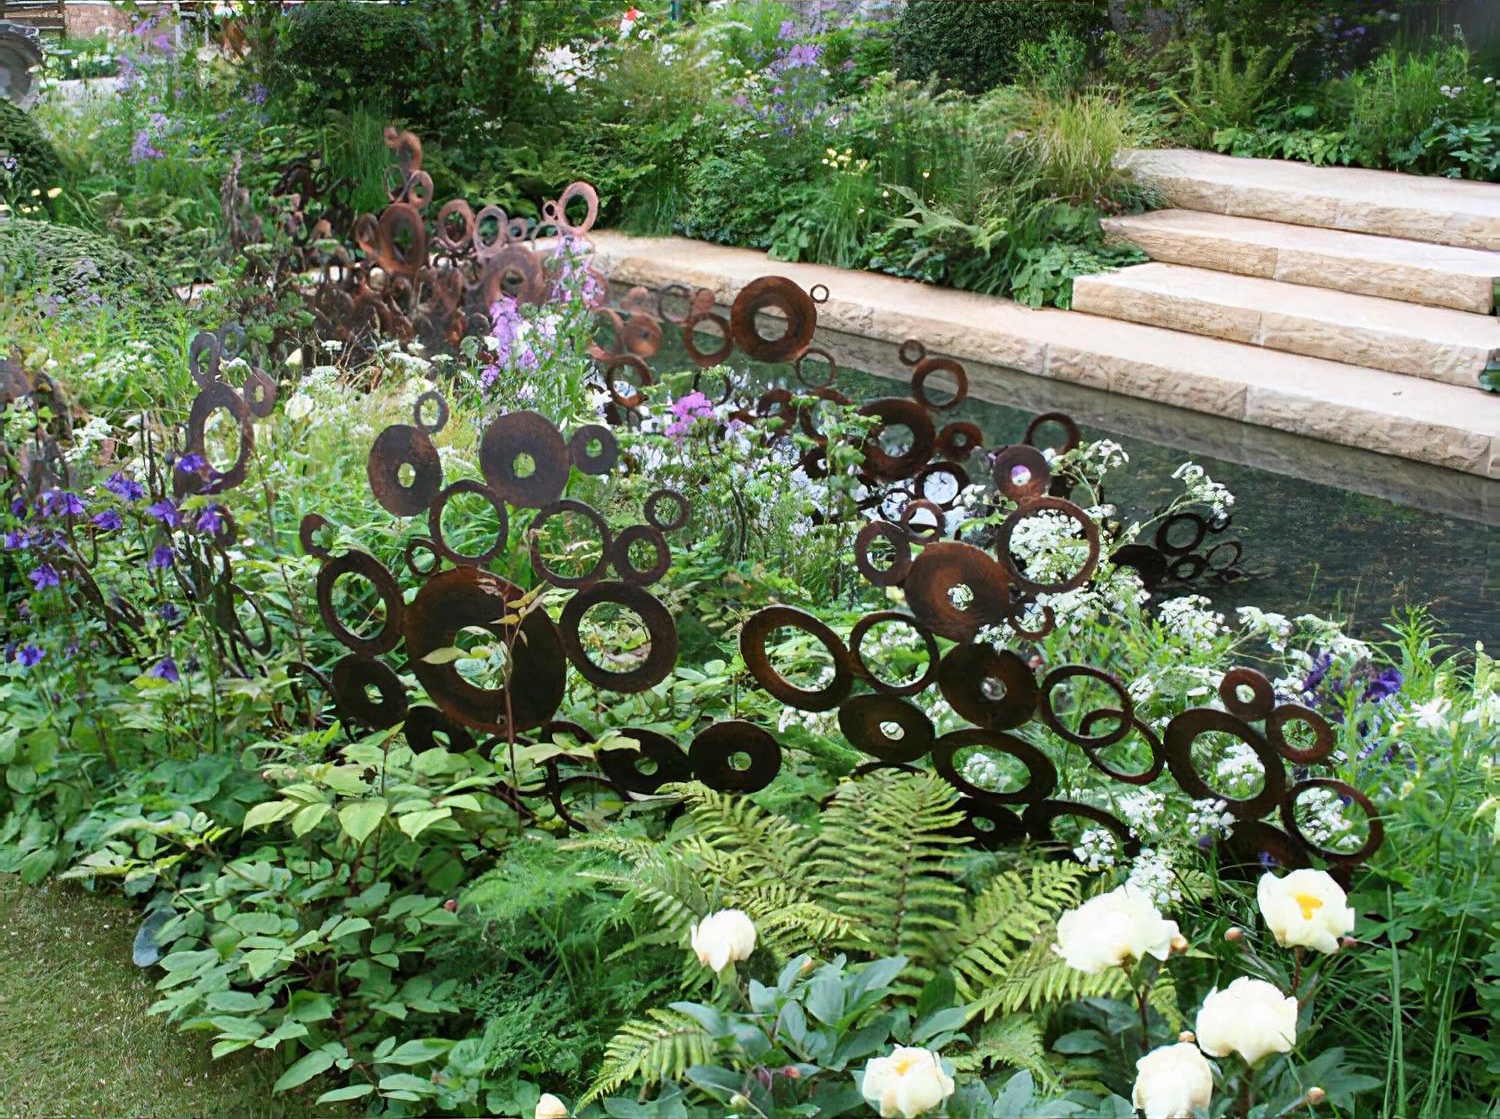 RHS Chelsea Flower Show 2012 The M&G Garden designed by Andy Sturgeon